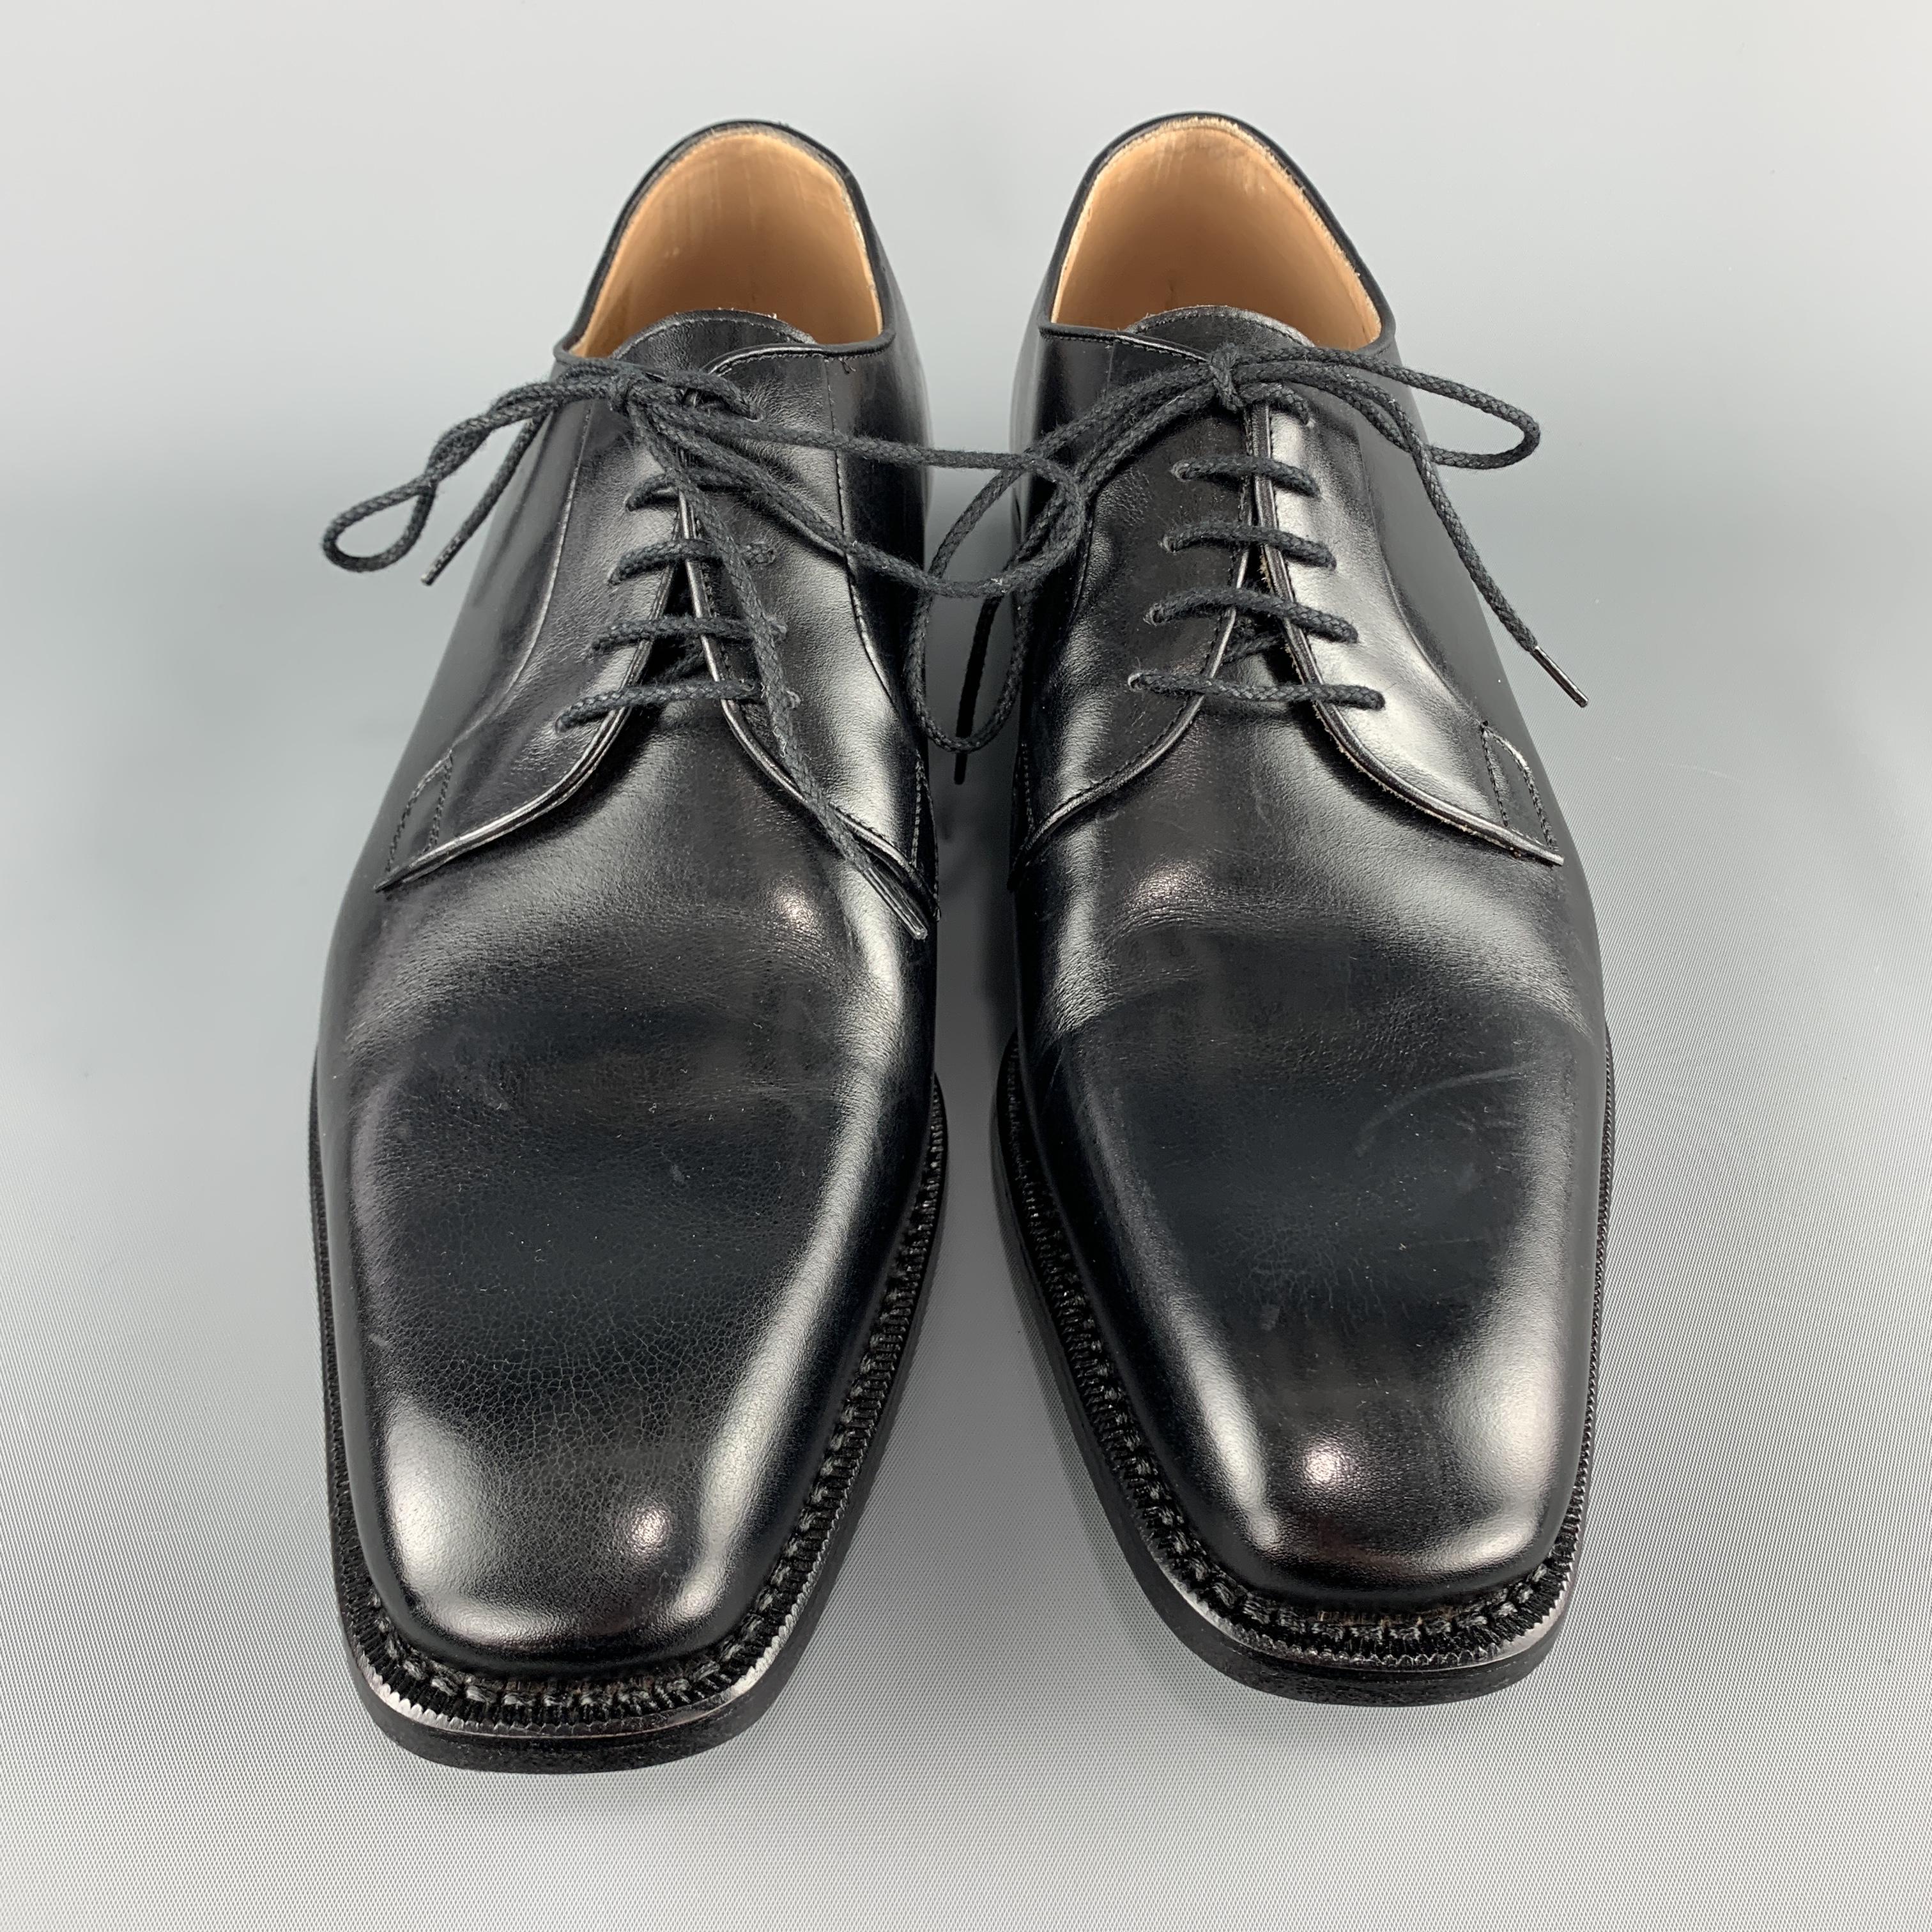 CALZOLERIA HARRIS for BARNEY'S NEW YORK derby's come in black leather with a squared tip point toe. Made in Italy.

New in Box.
Marked: US 10

Outsole: 12.25 x 4 in.